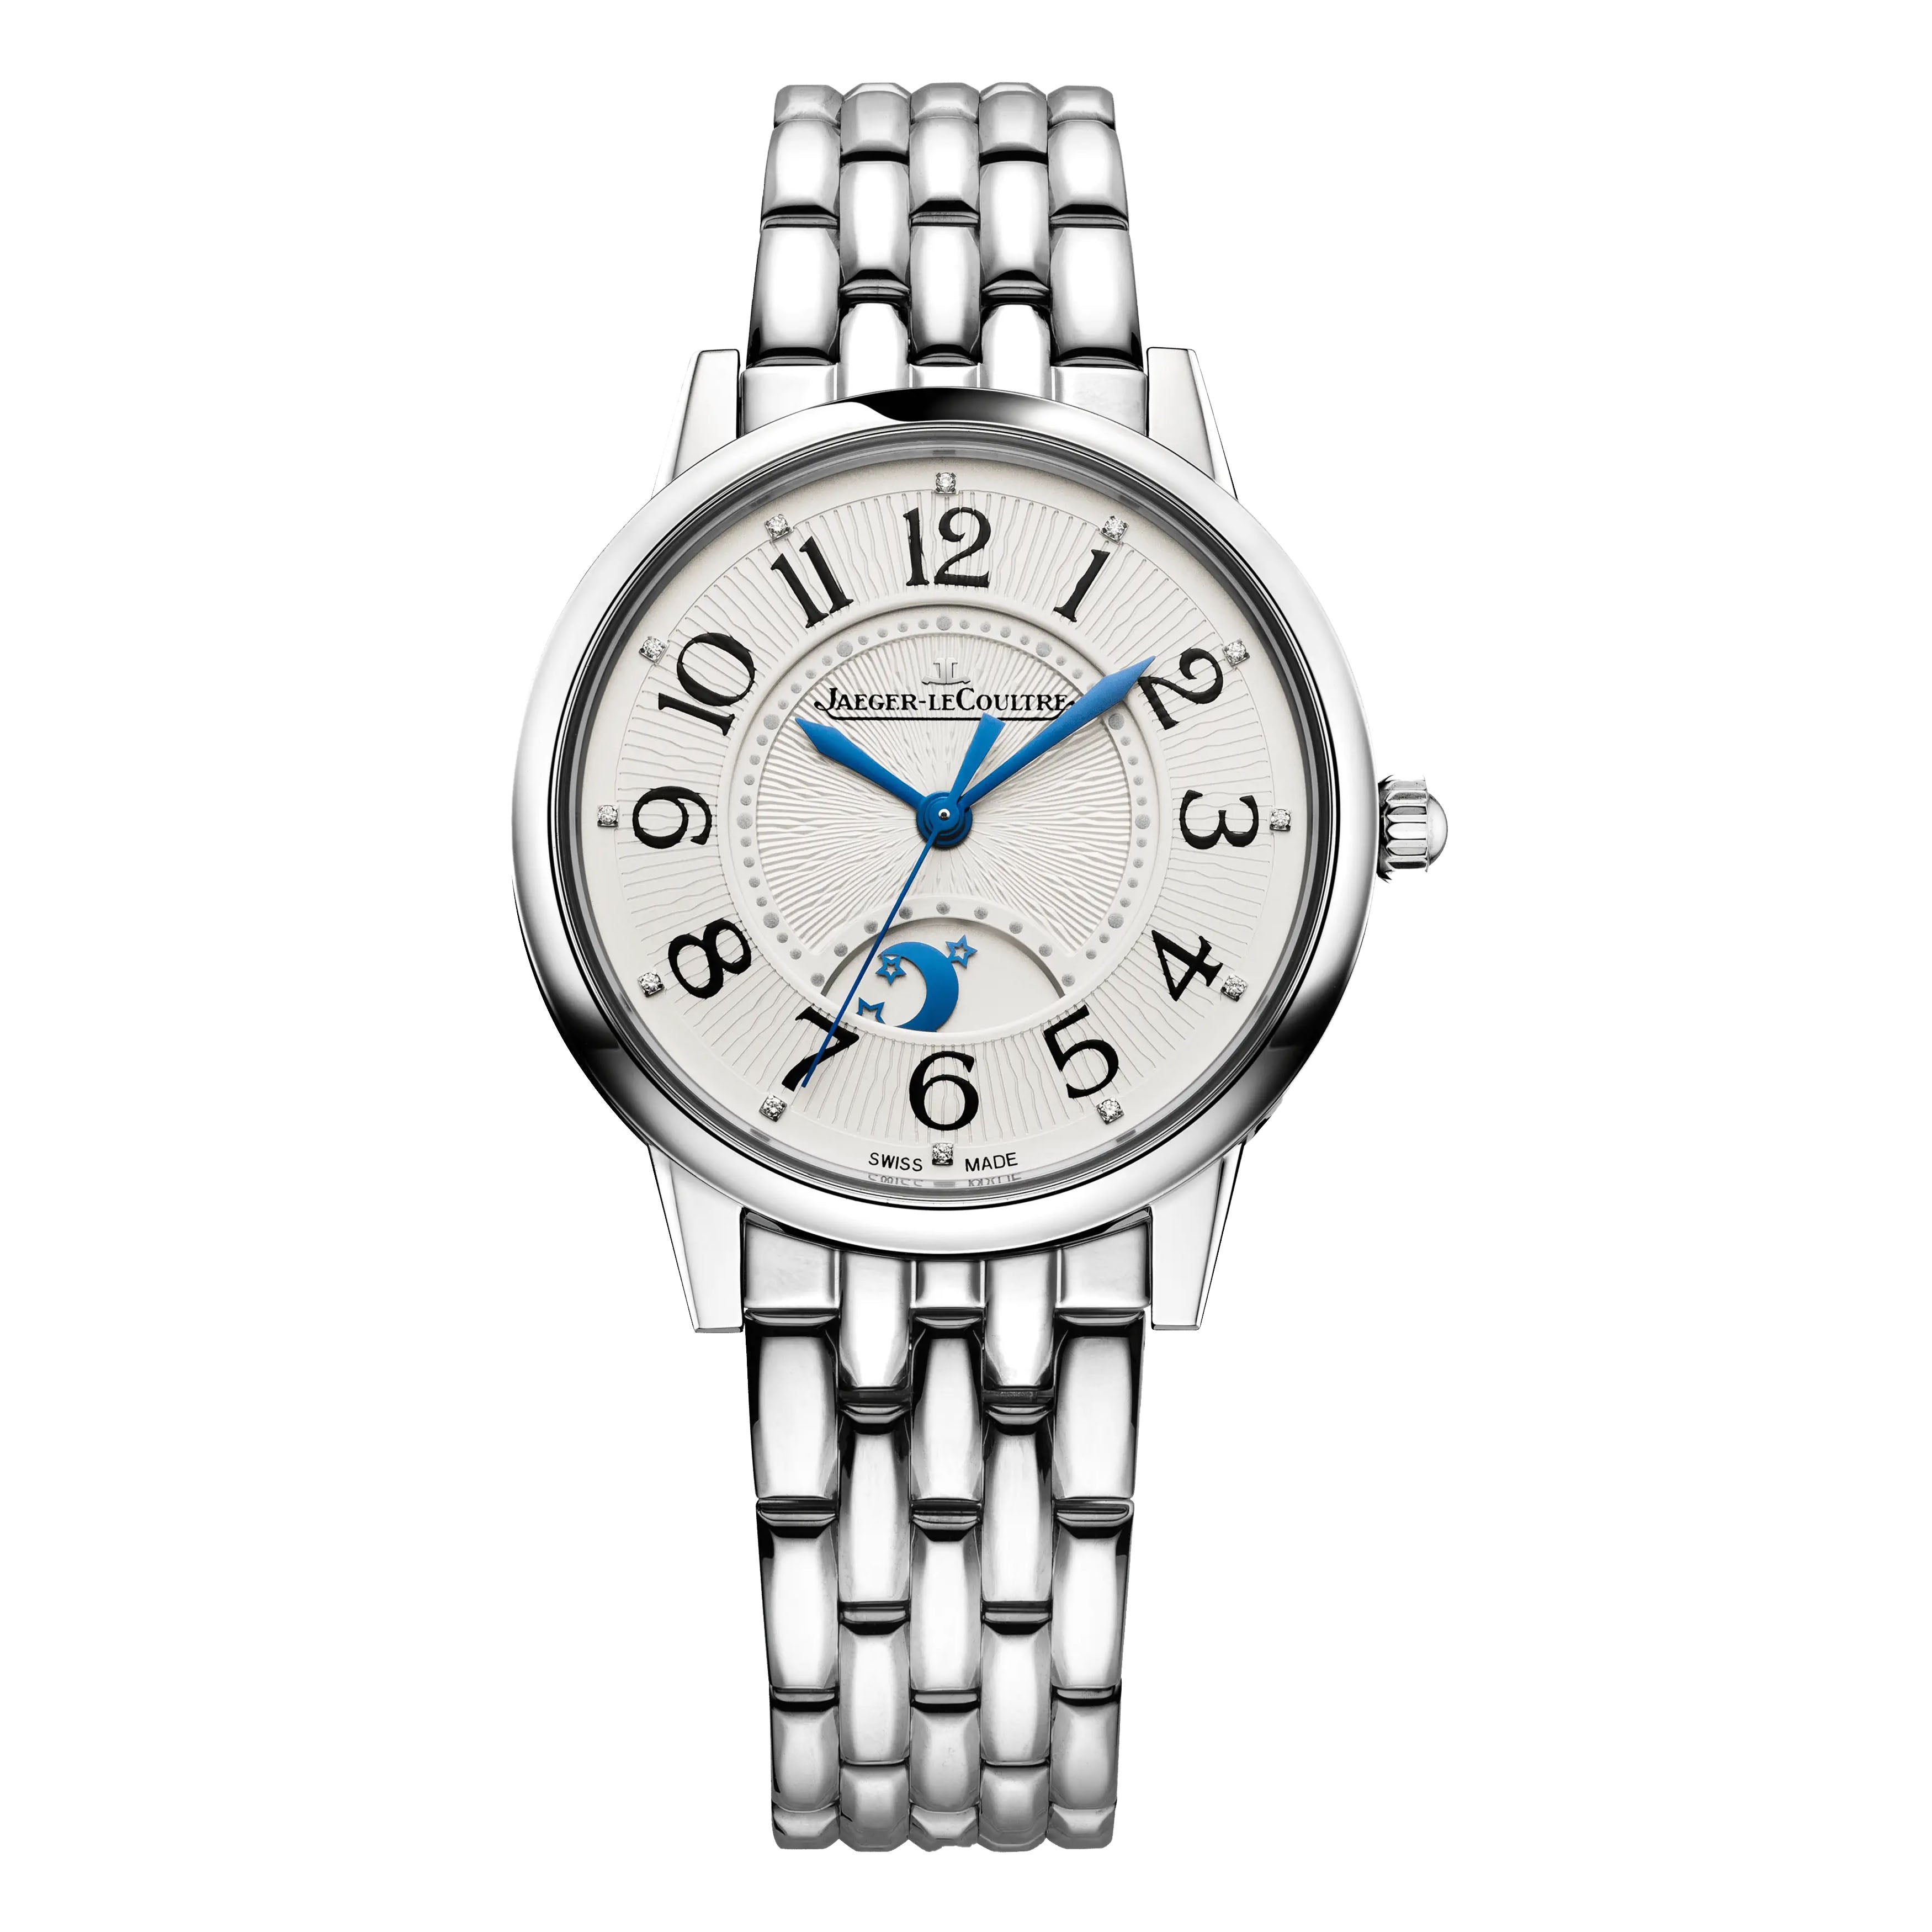 Jaeger-LeCoultre Randez-Vous Classic Night & Day Watch, 34mm Silver Dial, Q3448110